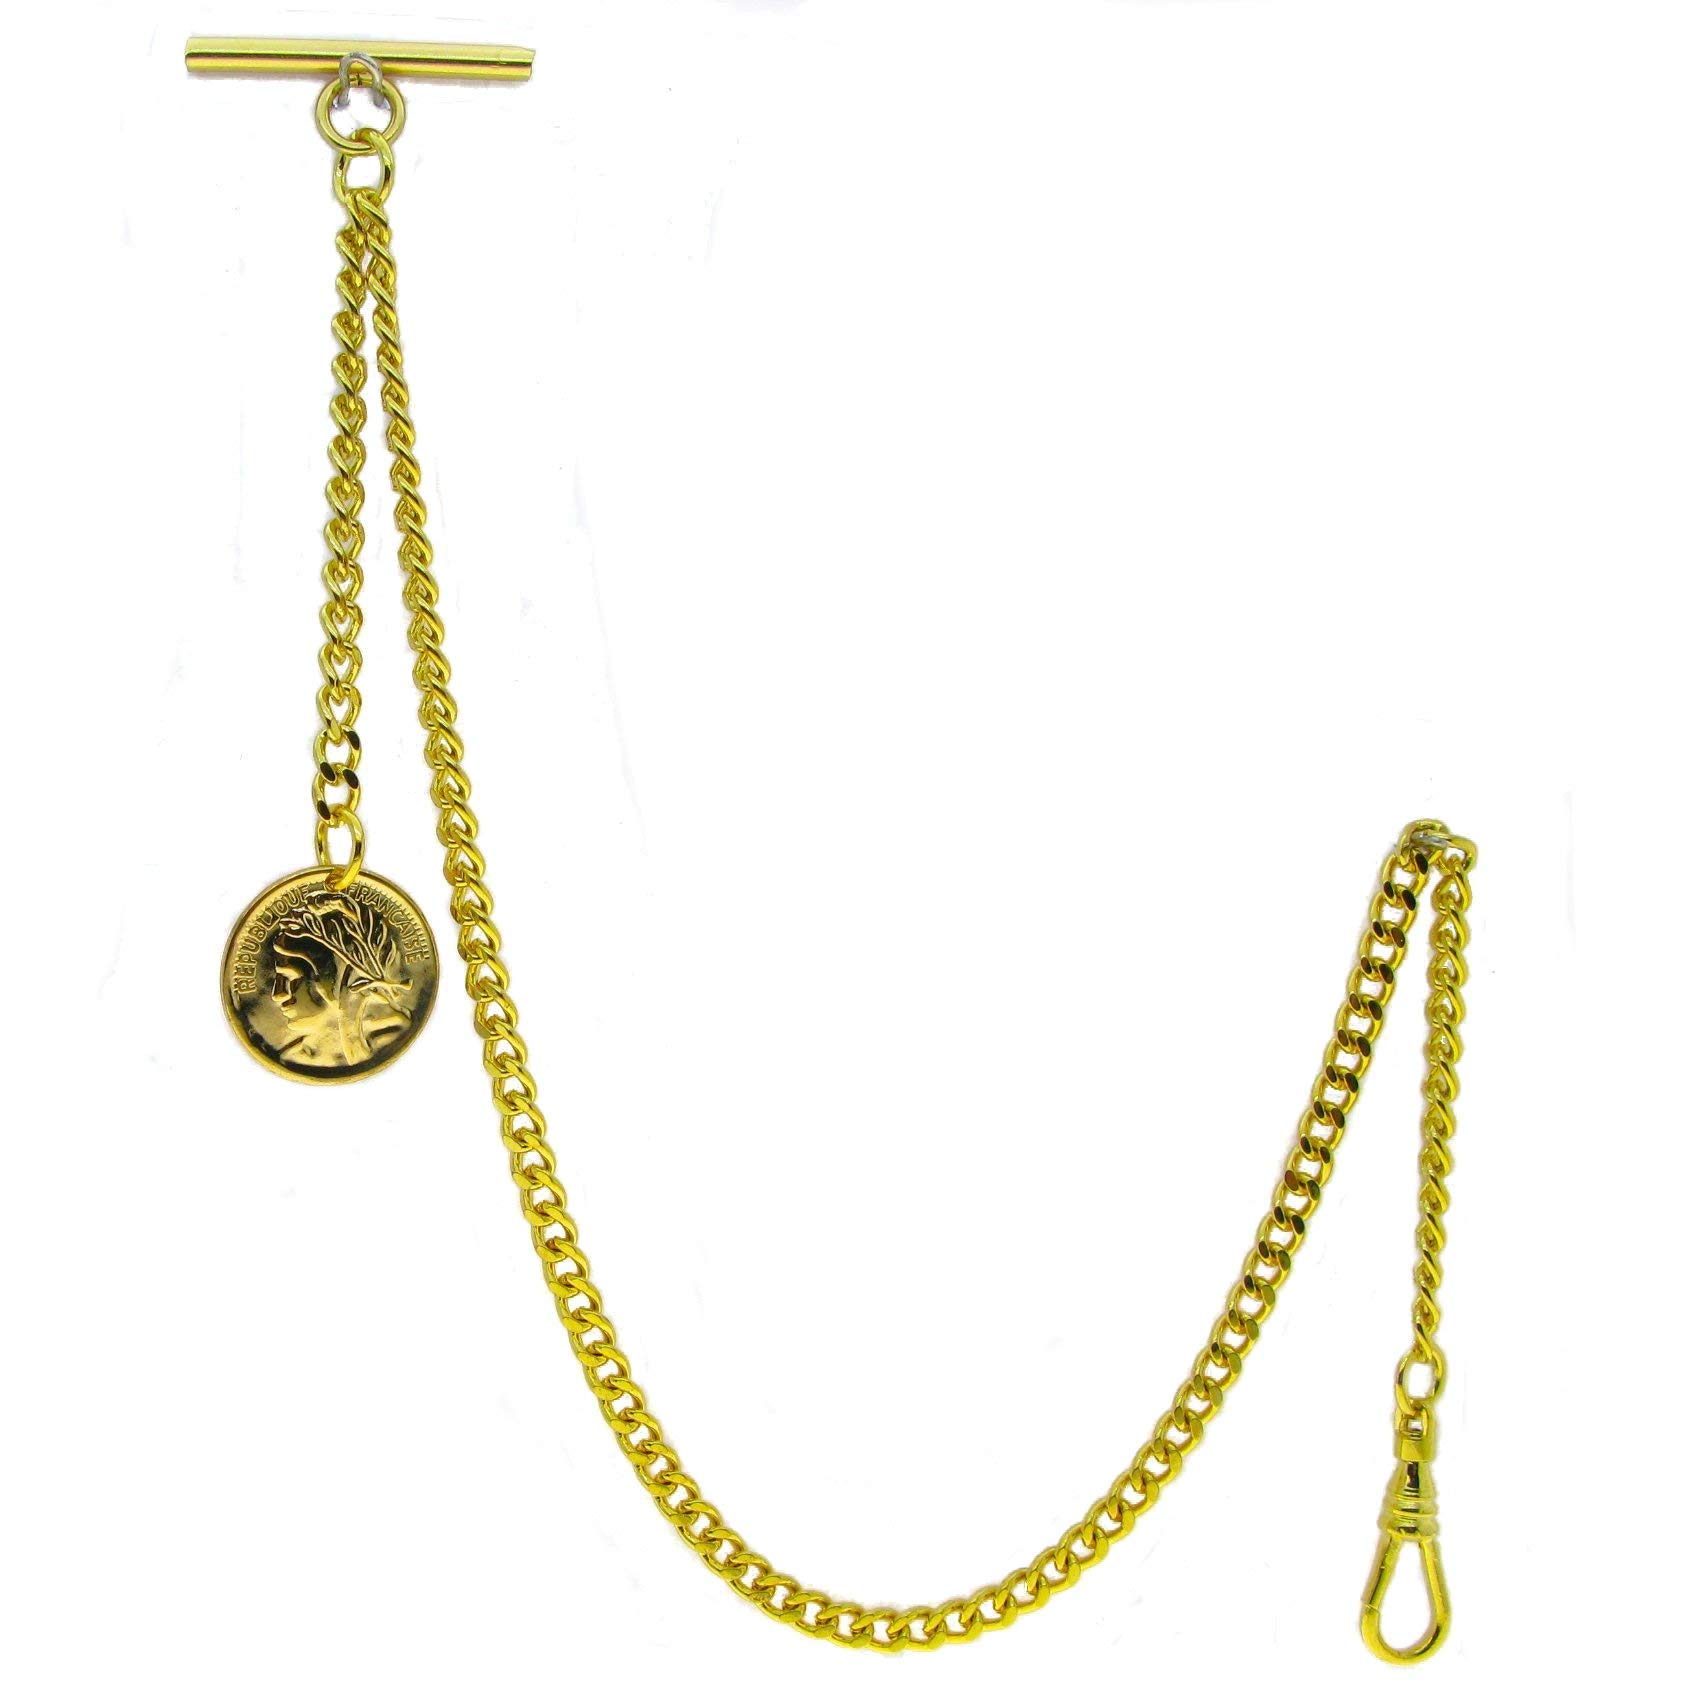 Albert Chain Gold Color Pocket Watch Chains for Men with T Bar Swivel Clasp and Ancient France Coin Design Medal Fob AC78